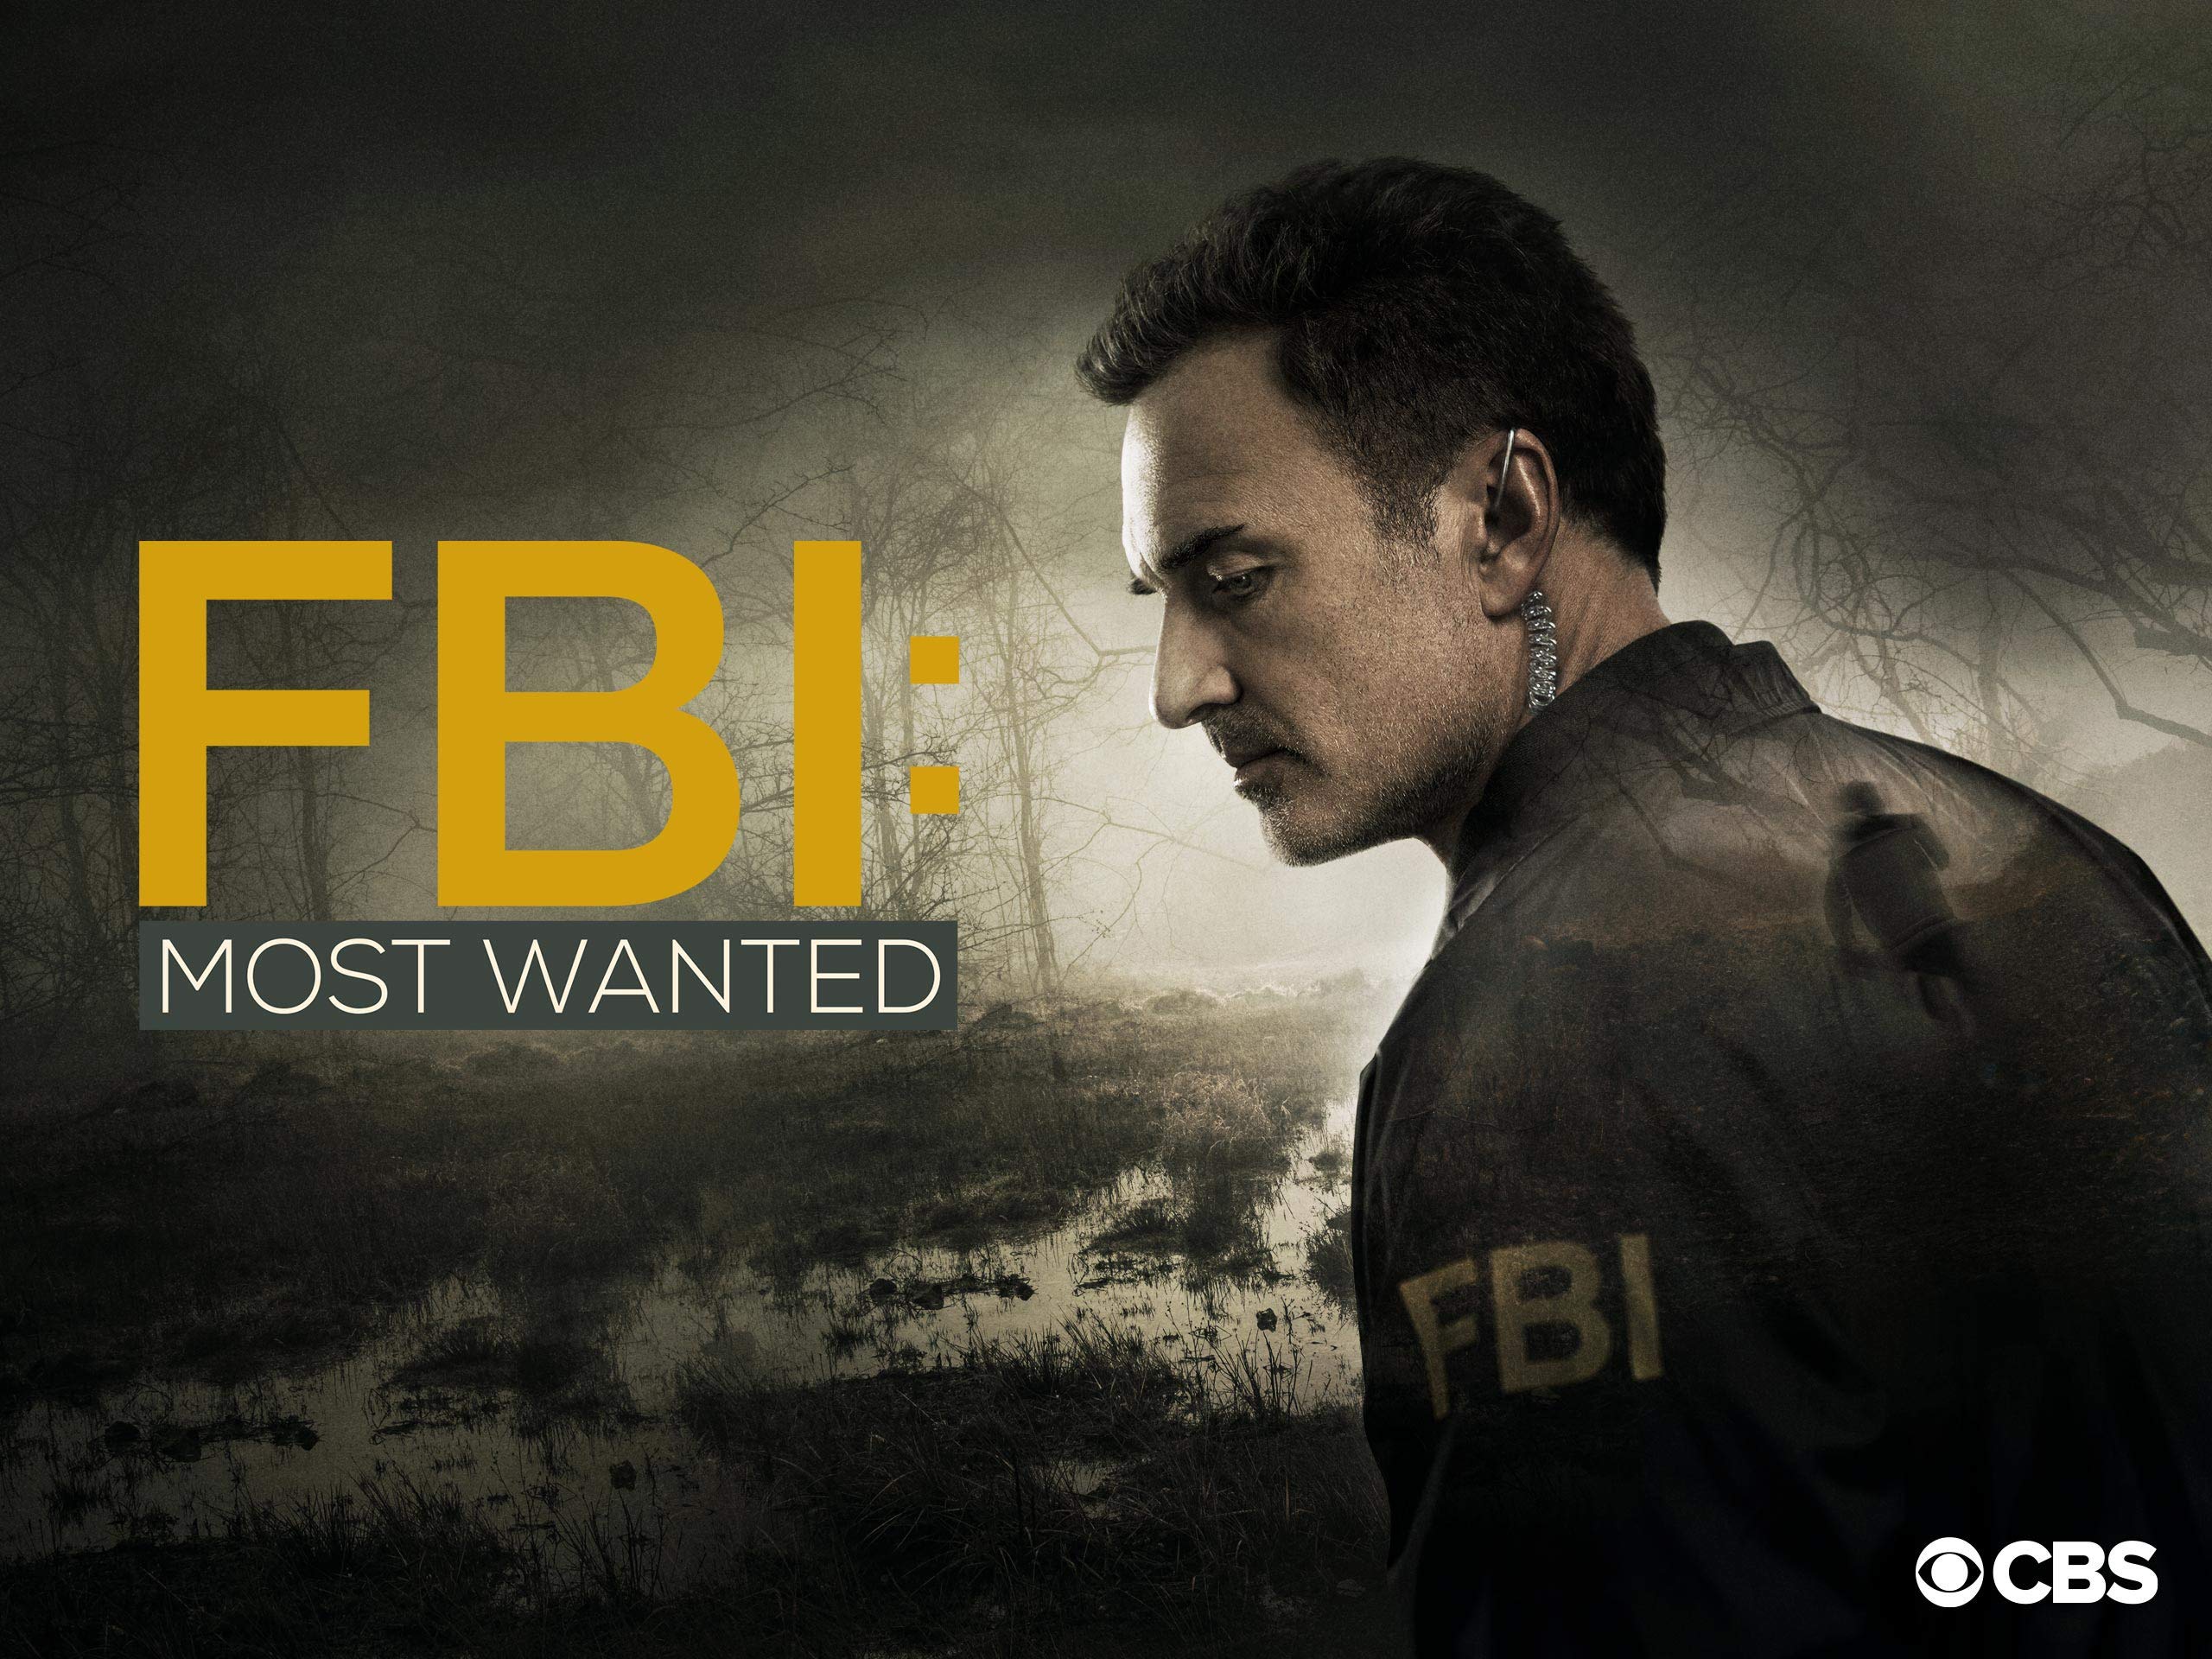 [Movie] FBI: Most Wanted